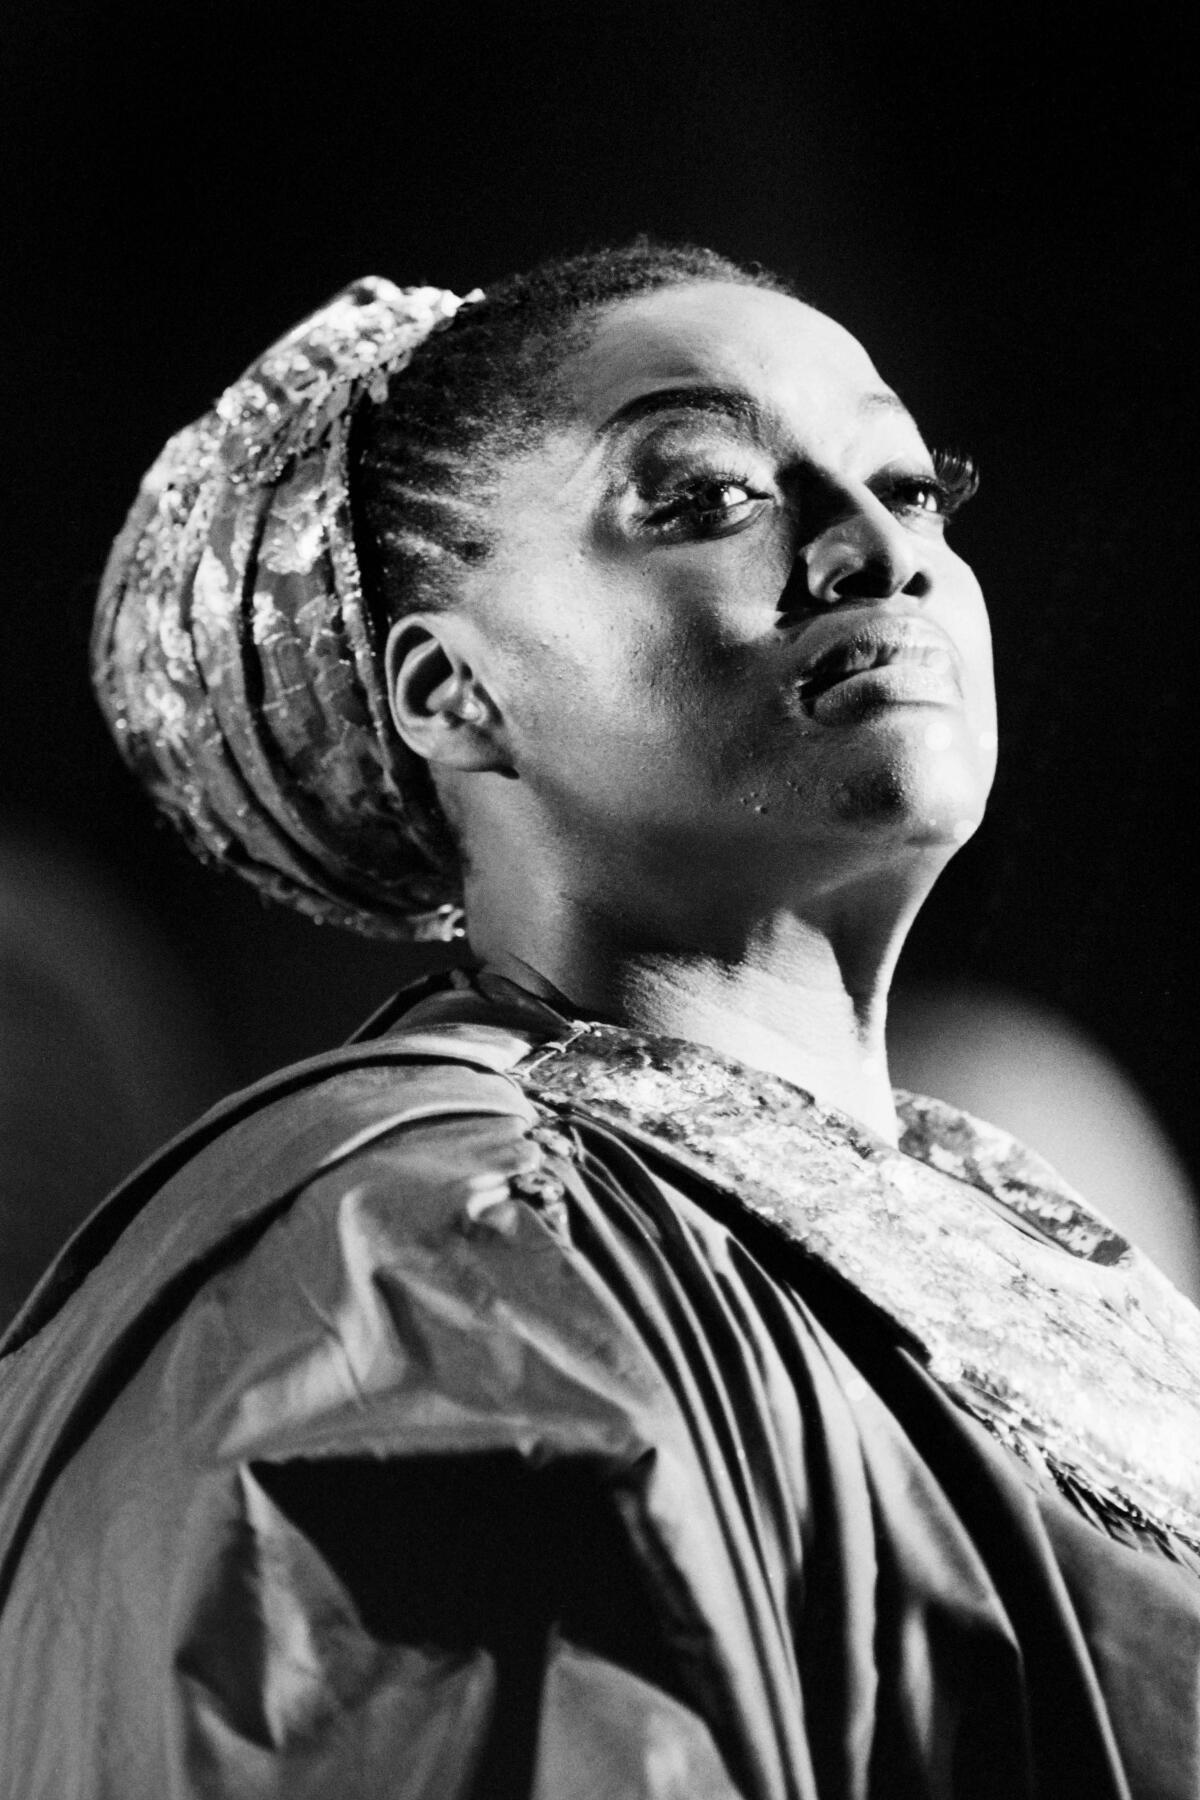 Jessye Norman performing in Purcell's "Dido and Aneas" at Opera Comique in Paris in 1984.